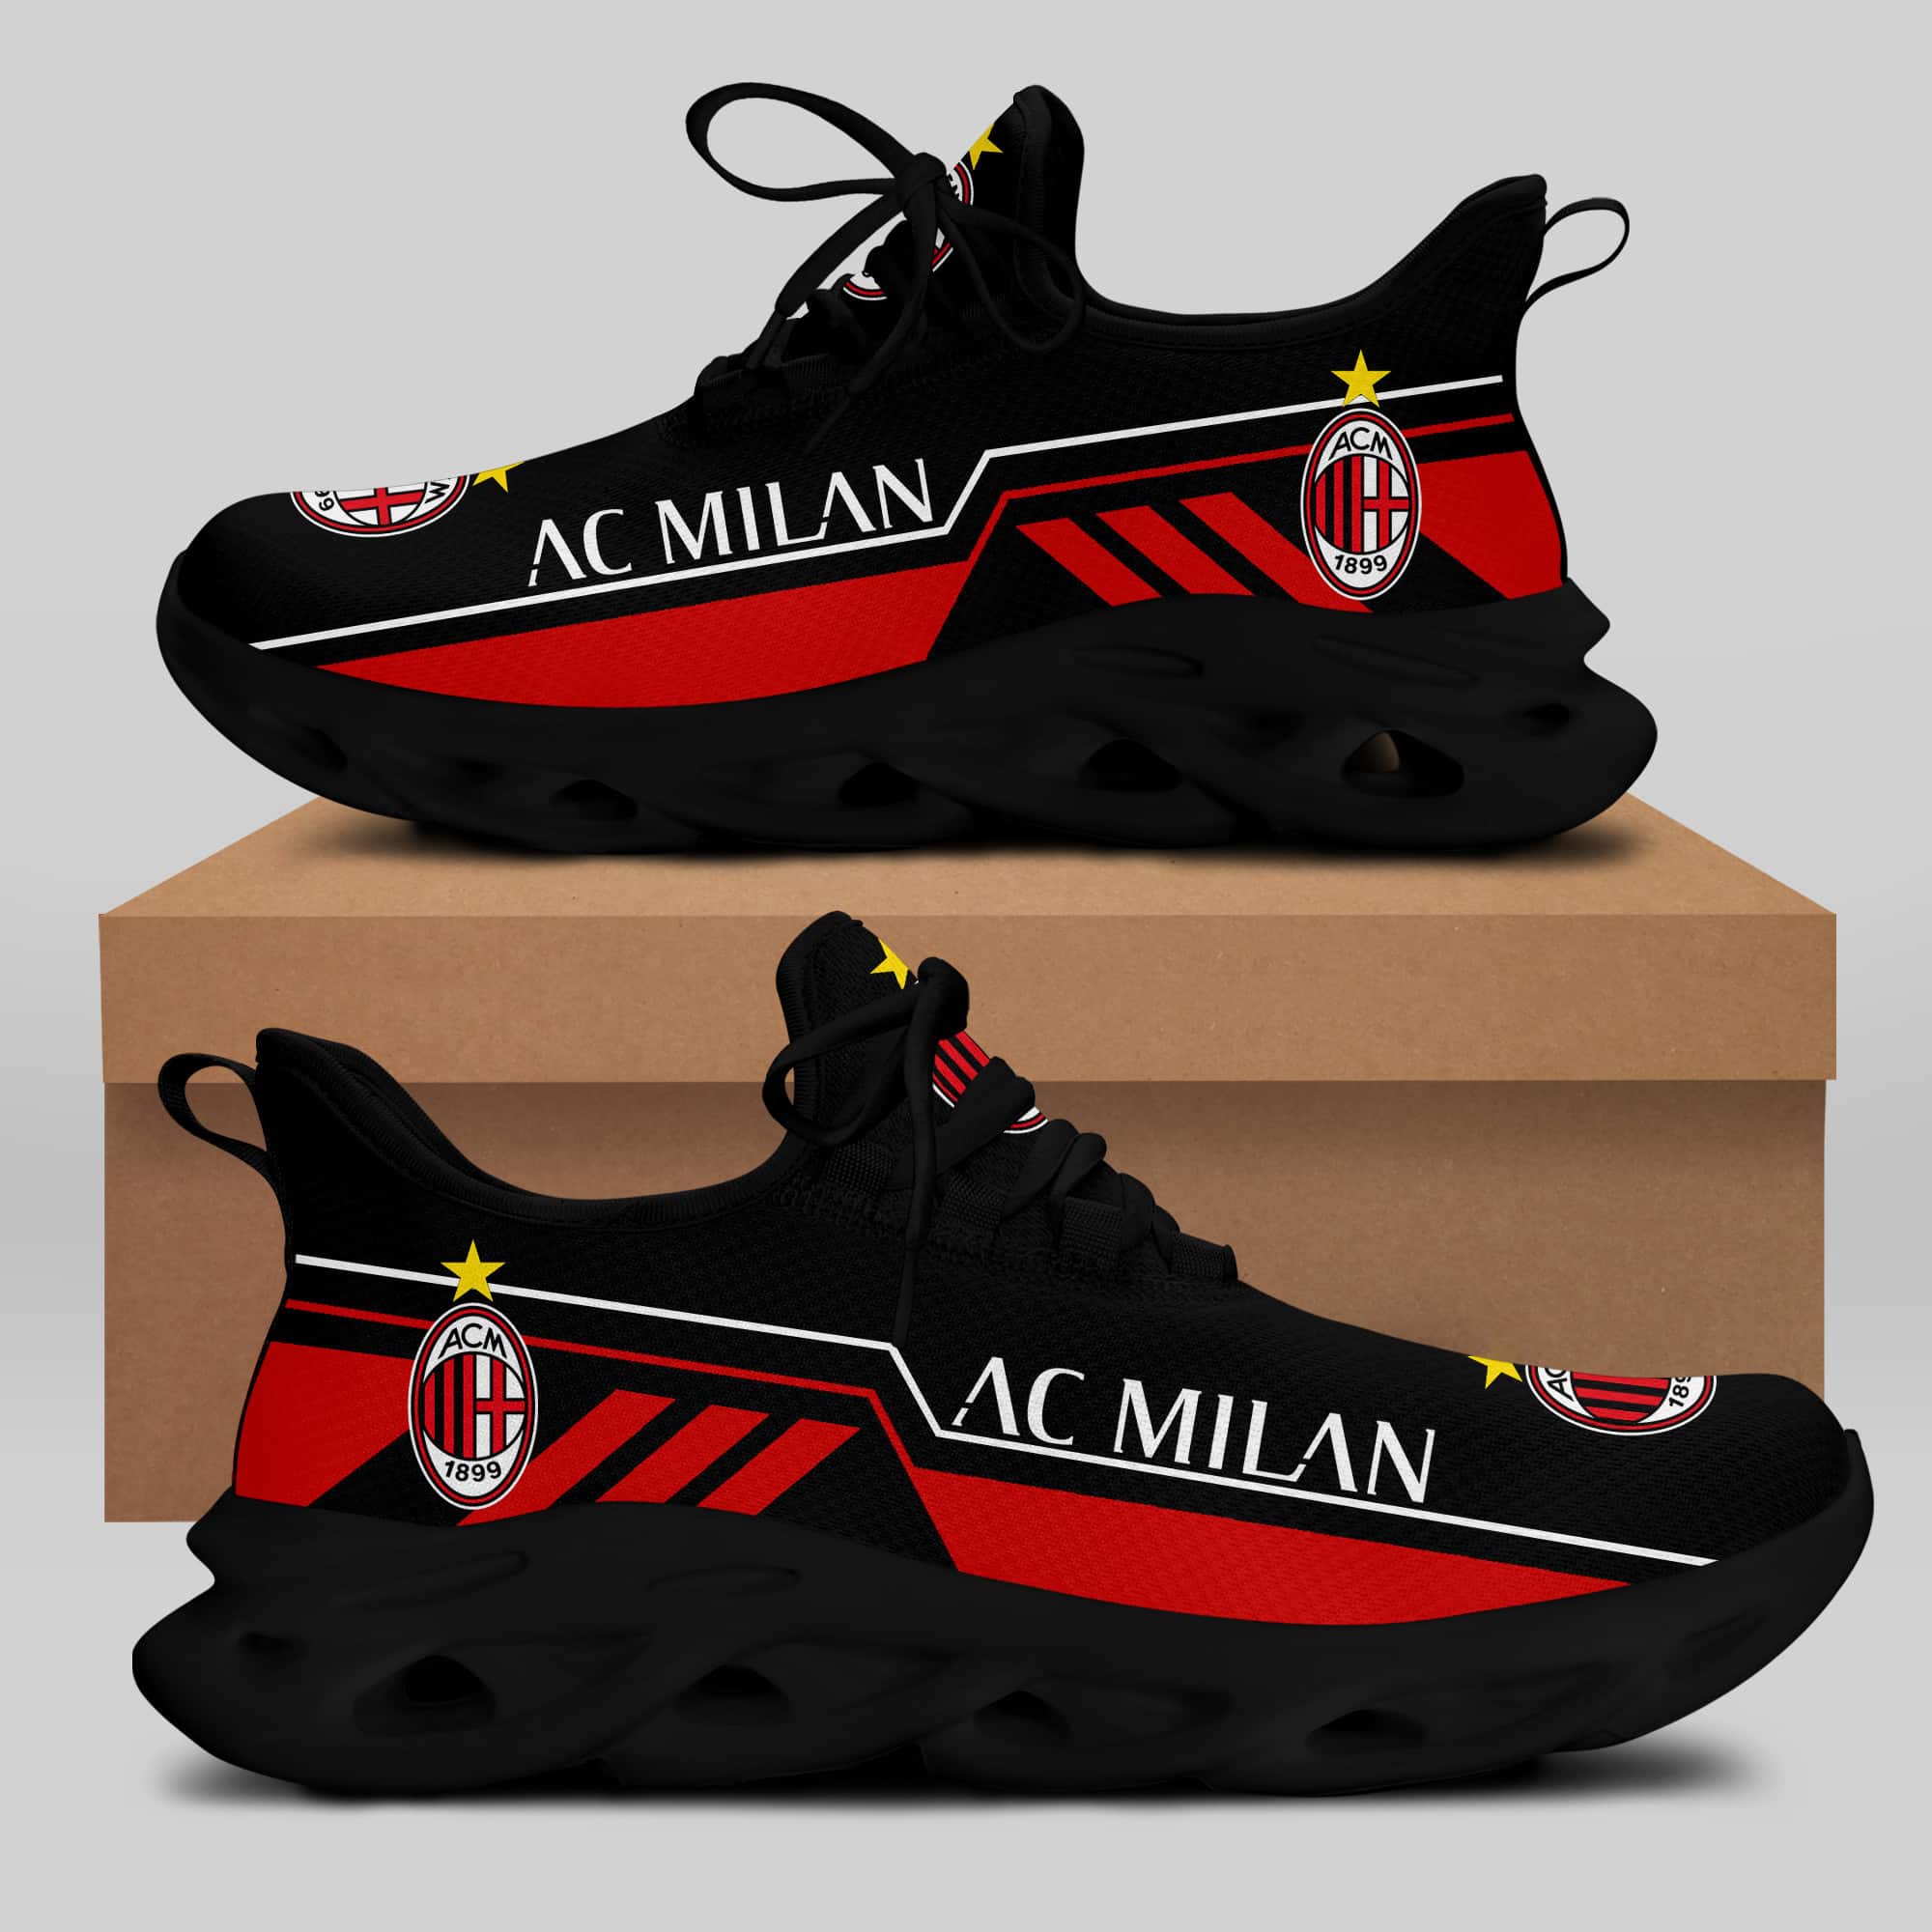 Ac Milan Running Shoes Max Soul Shoes Sneakers Ver 14 1